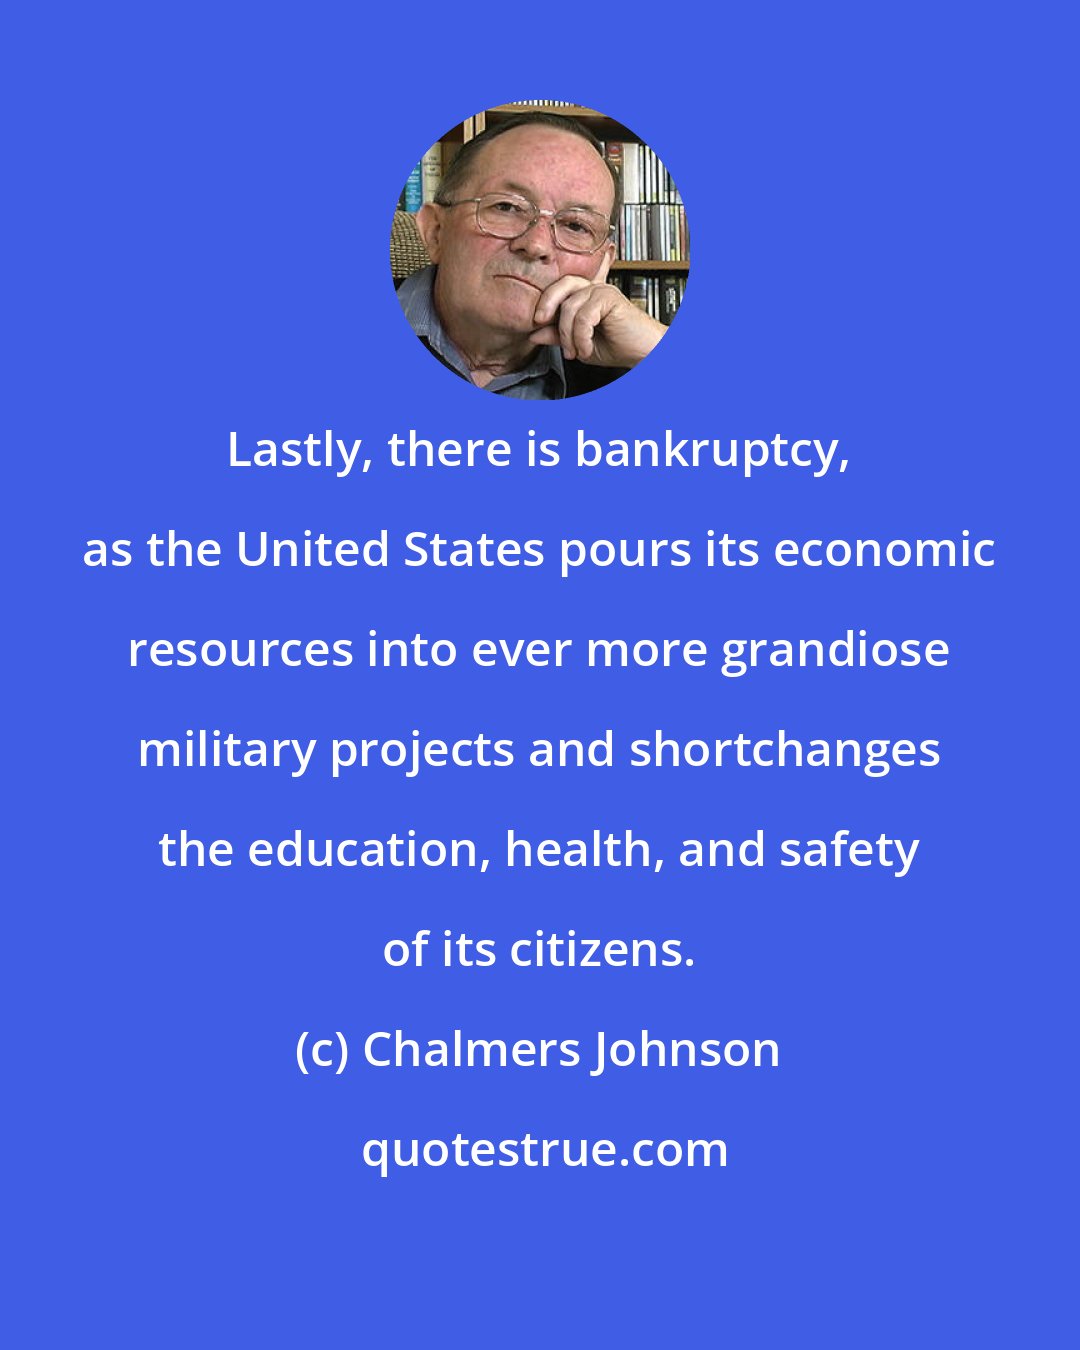 Chalmers Johnson: Lastly, there is bankruptcy, as the United States pours its economic resources into ever more grandiose military projects and shortchanges the education, health, and safety of its citizens.